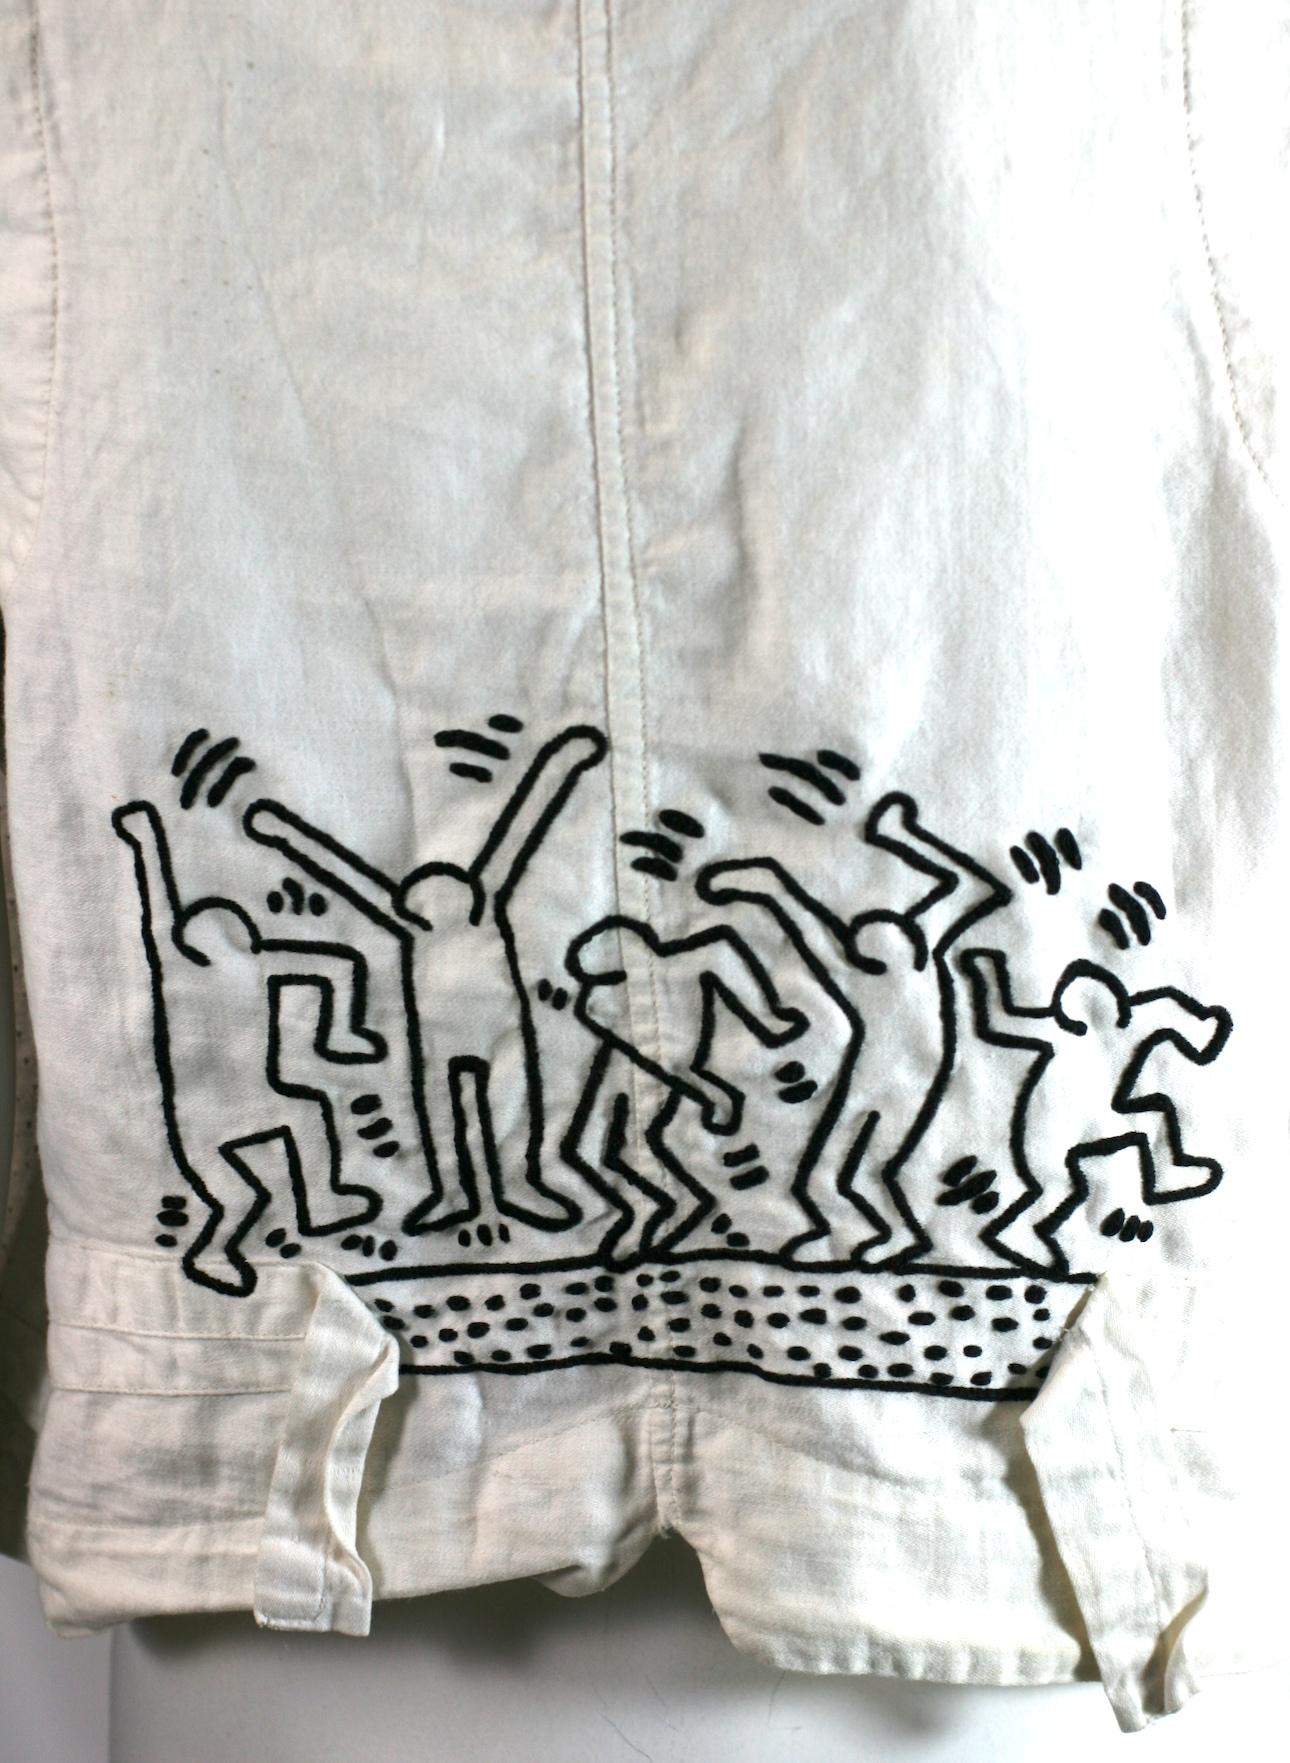 Unique Hand Embroidered Victorian Vest with Keith Haring designs, upcycled by Studio VL. Late 19th Century heavy white cotton mens vest with black stippled dots and original mother of pearl buttons. The back is simple cotton with typical belt tabs